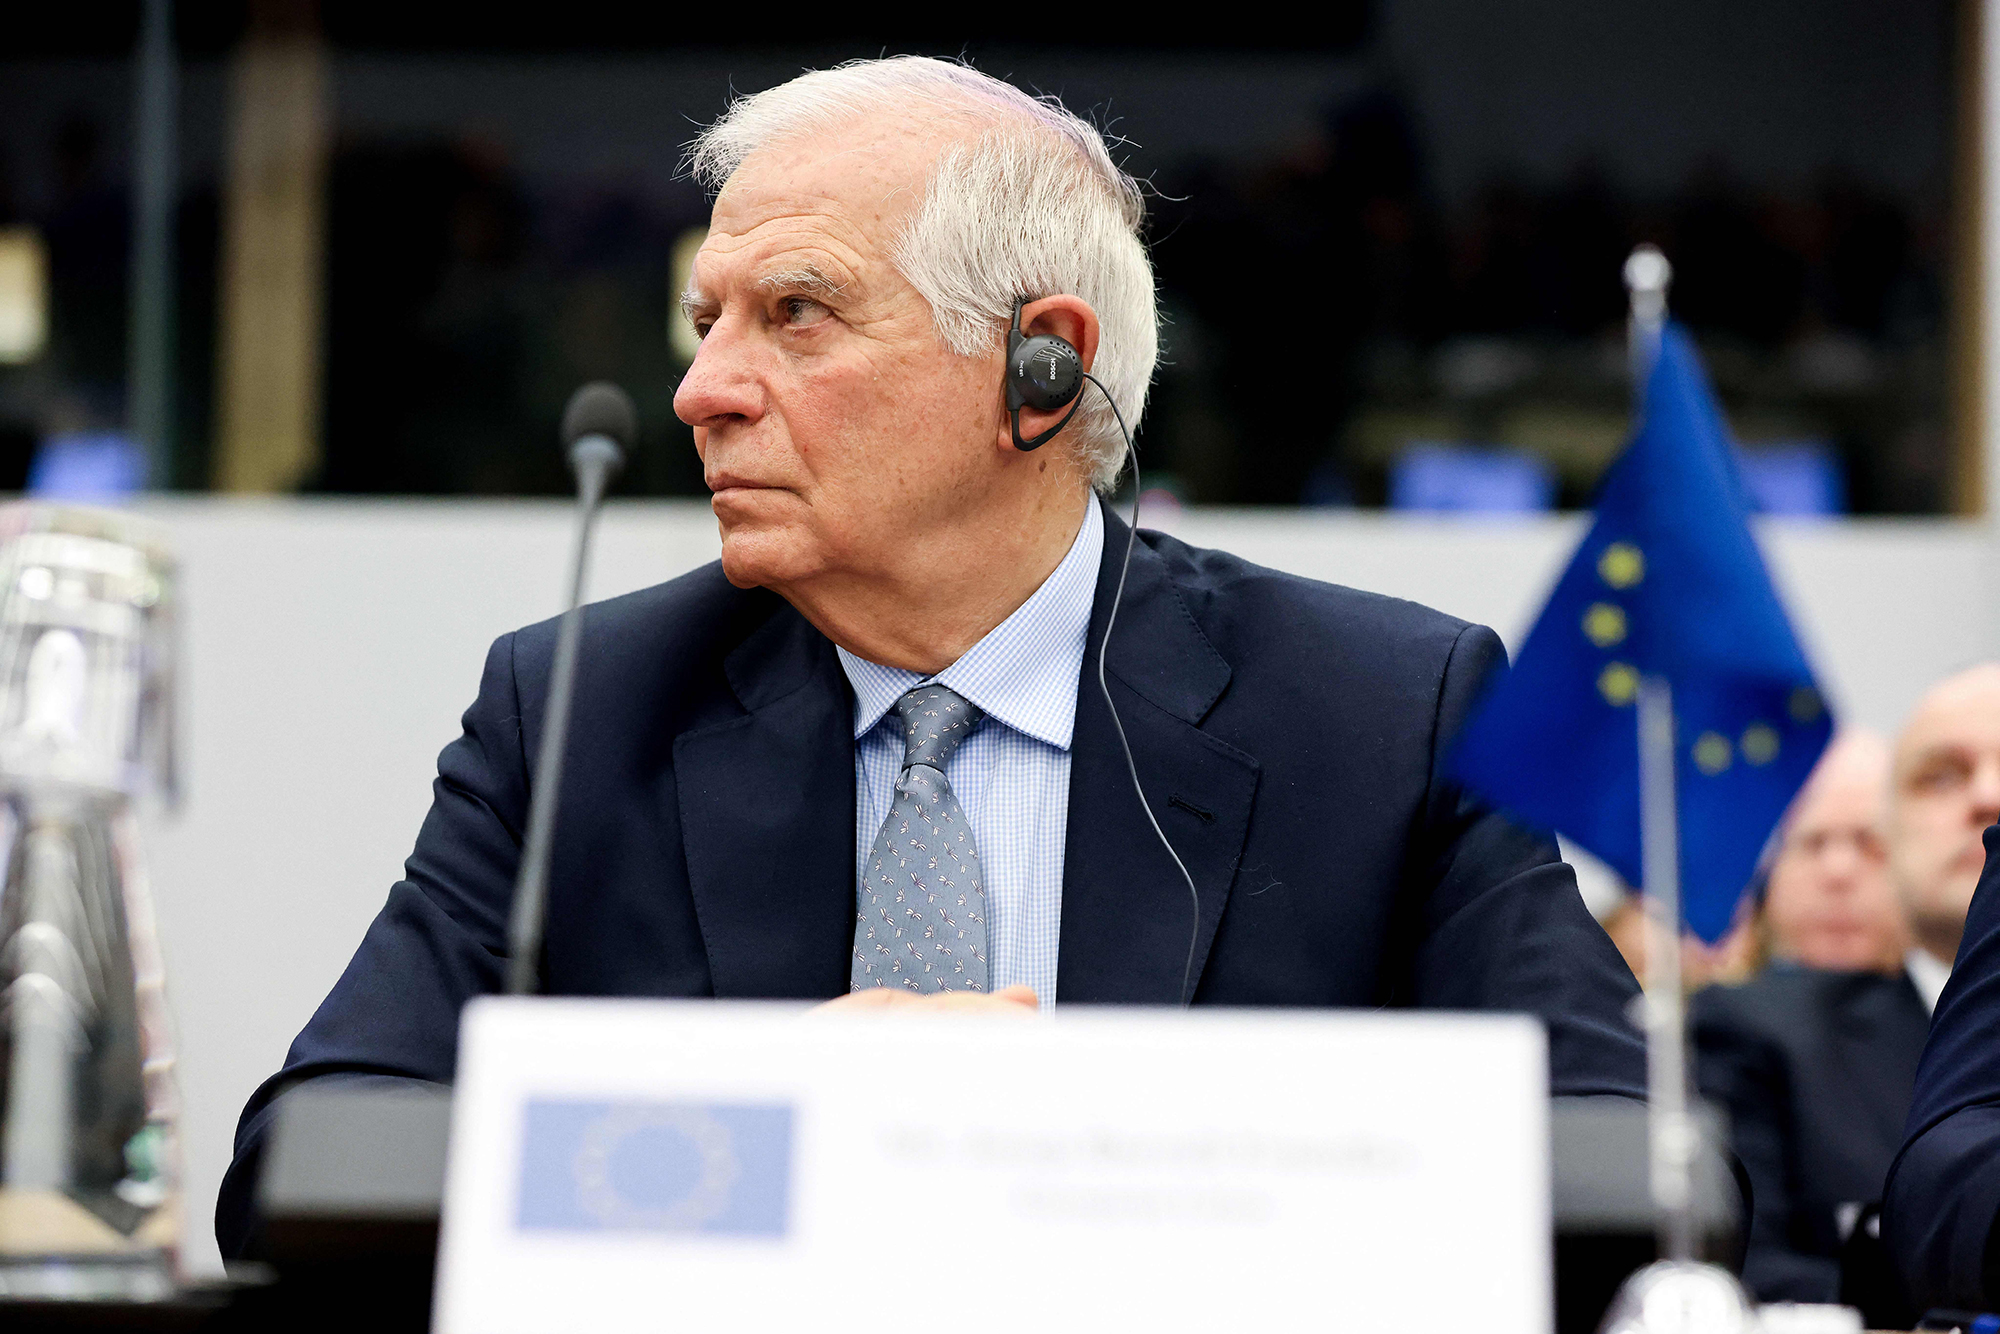 European Union foreign policy chief Josep Borrell looks on at the start of a two-day meeting of the alliance's Defense Ministers at the NATO headquarters in Brussels on February 14.